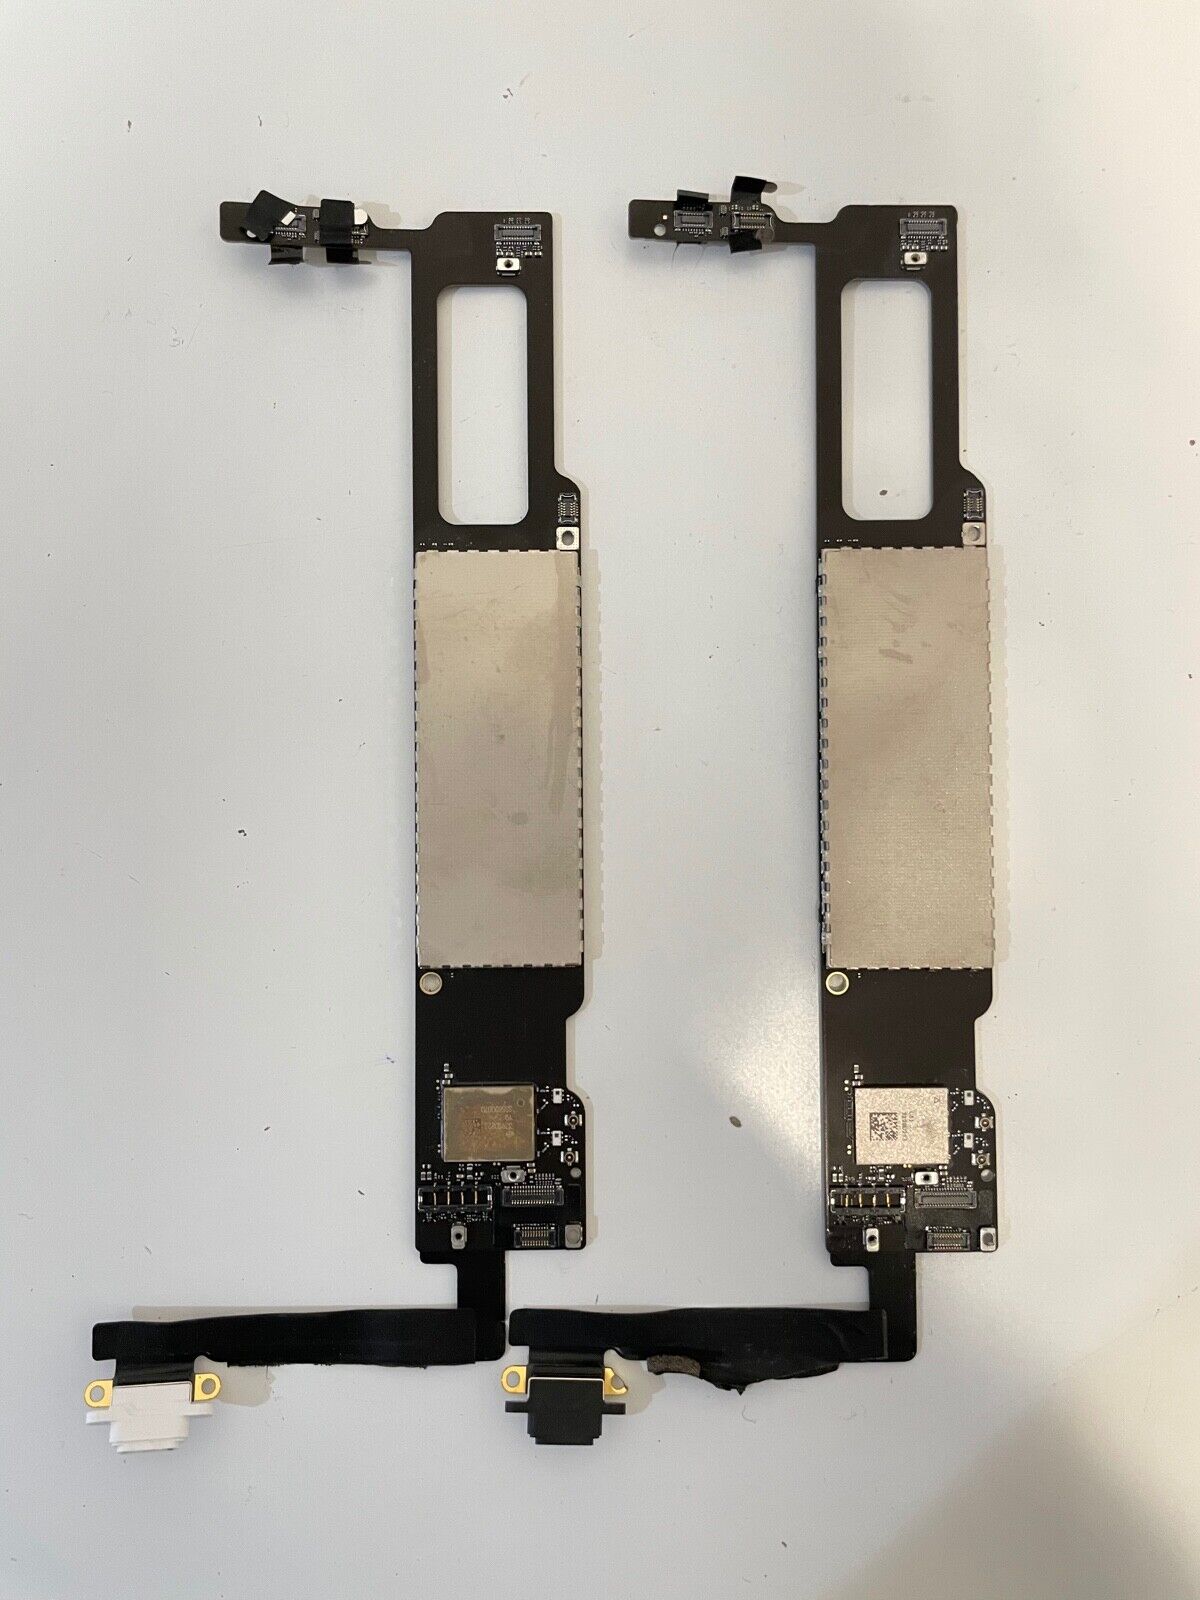 AS IS Lot of 2X Apple iPad Mini 2 2nd Gen. Logic Board Motherboards FOR PARTS